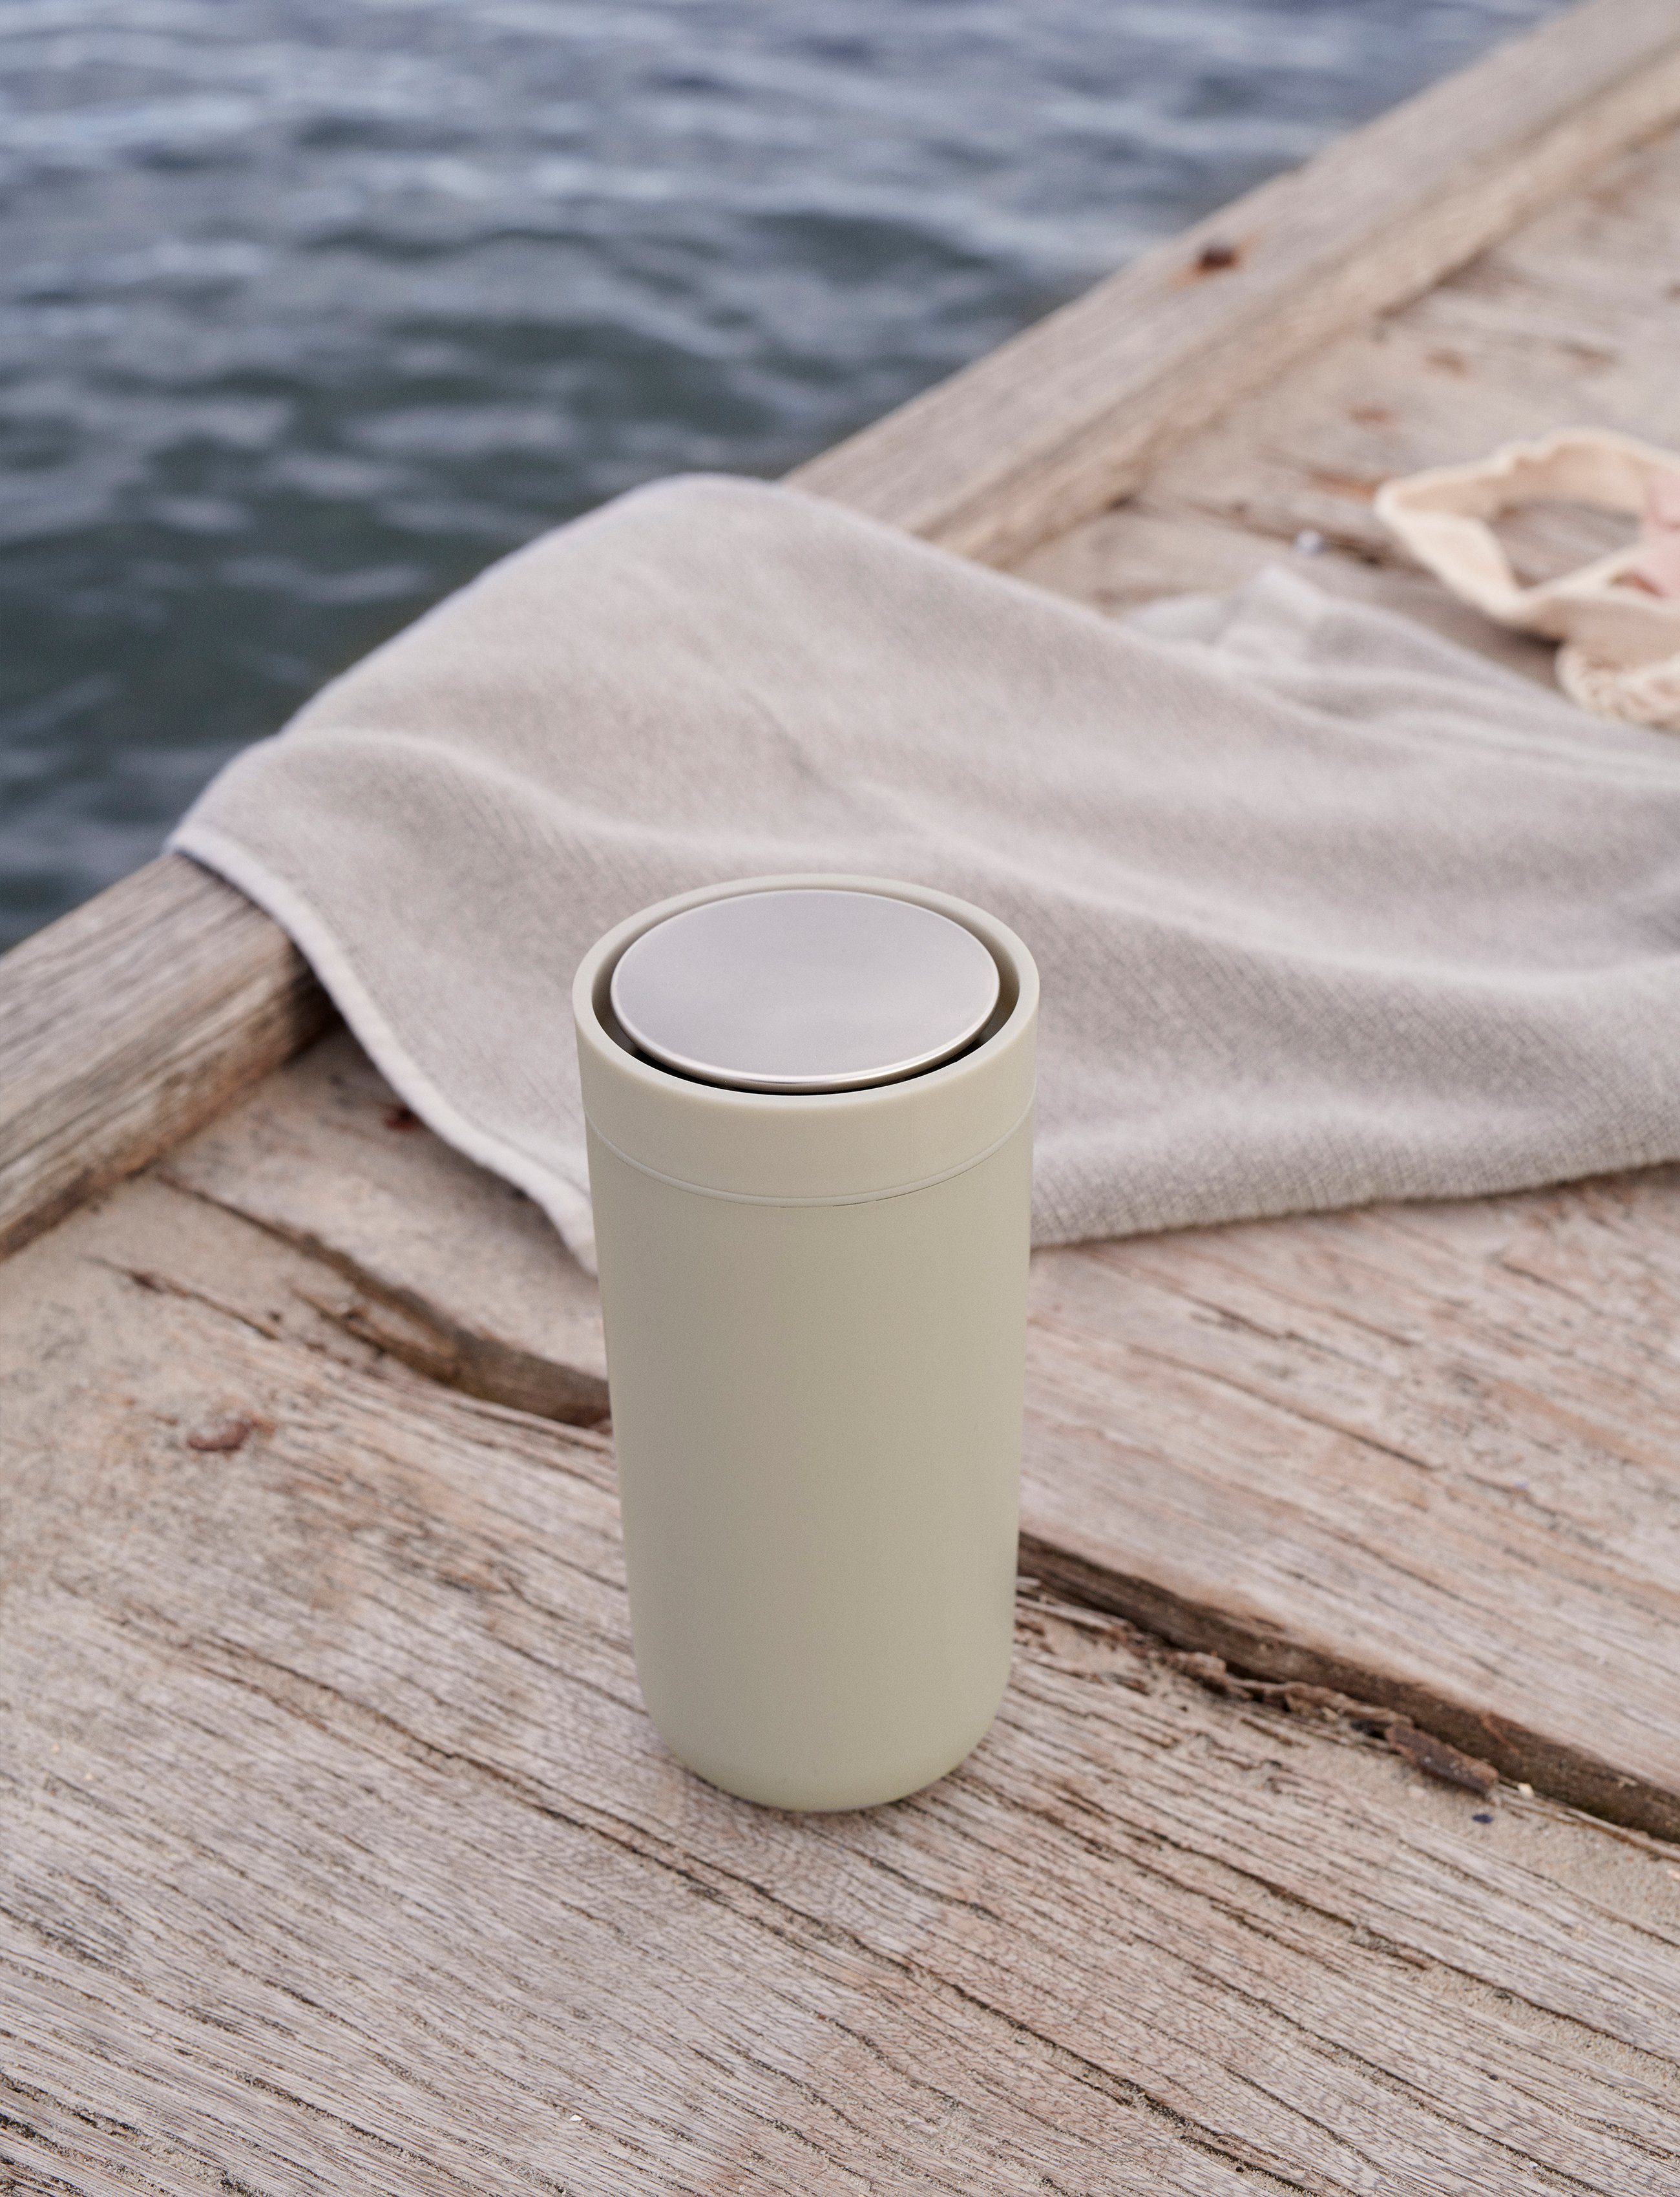 Stelton Thermobecher Stelton To Go Click Soft Edelstahl Sand Thermobecher